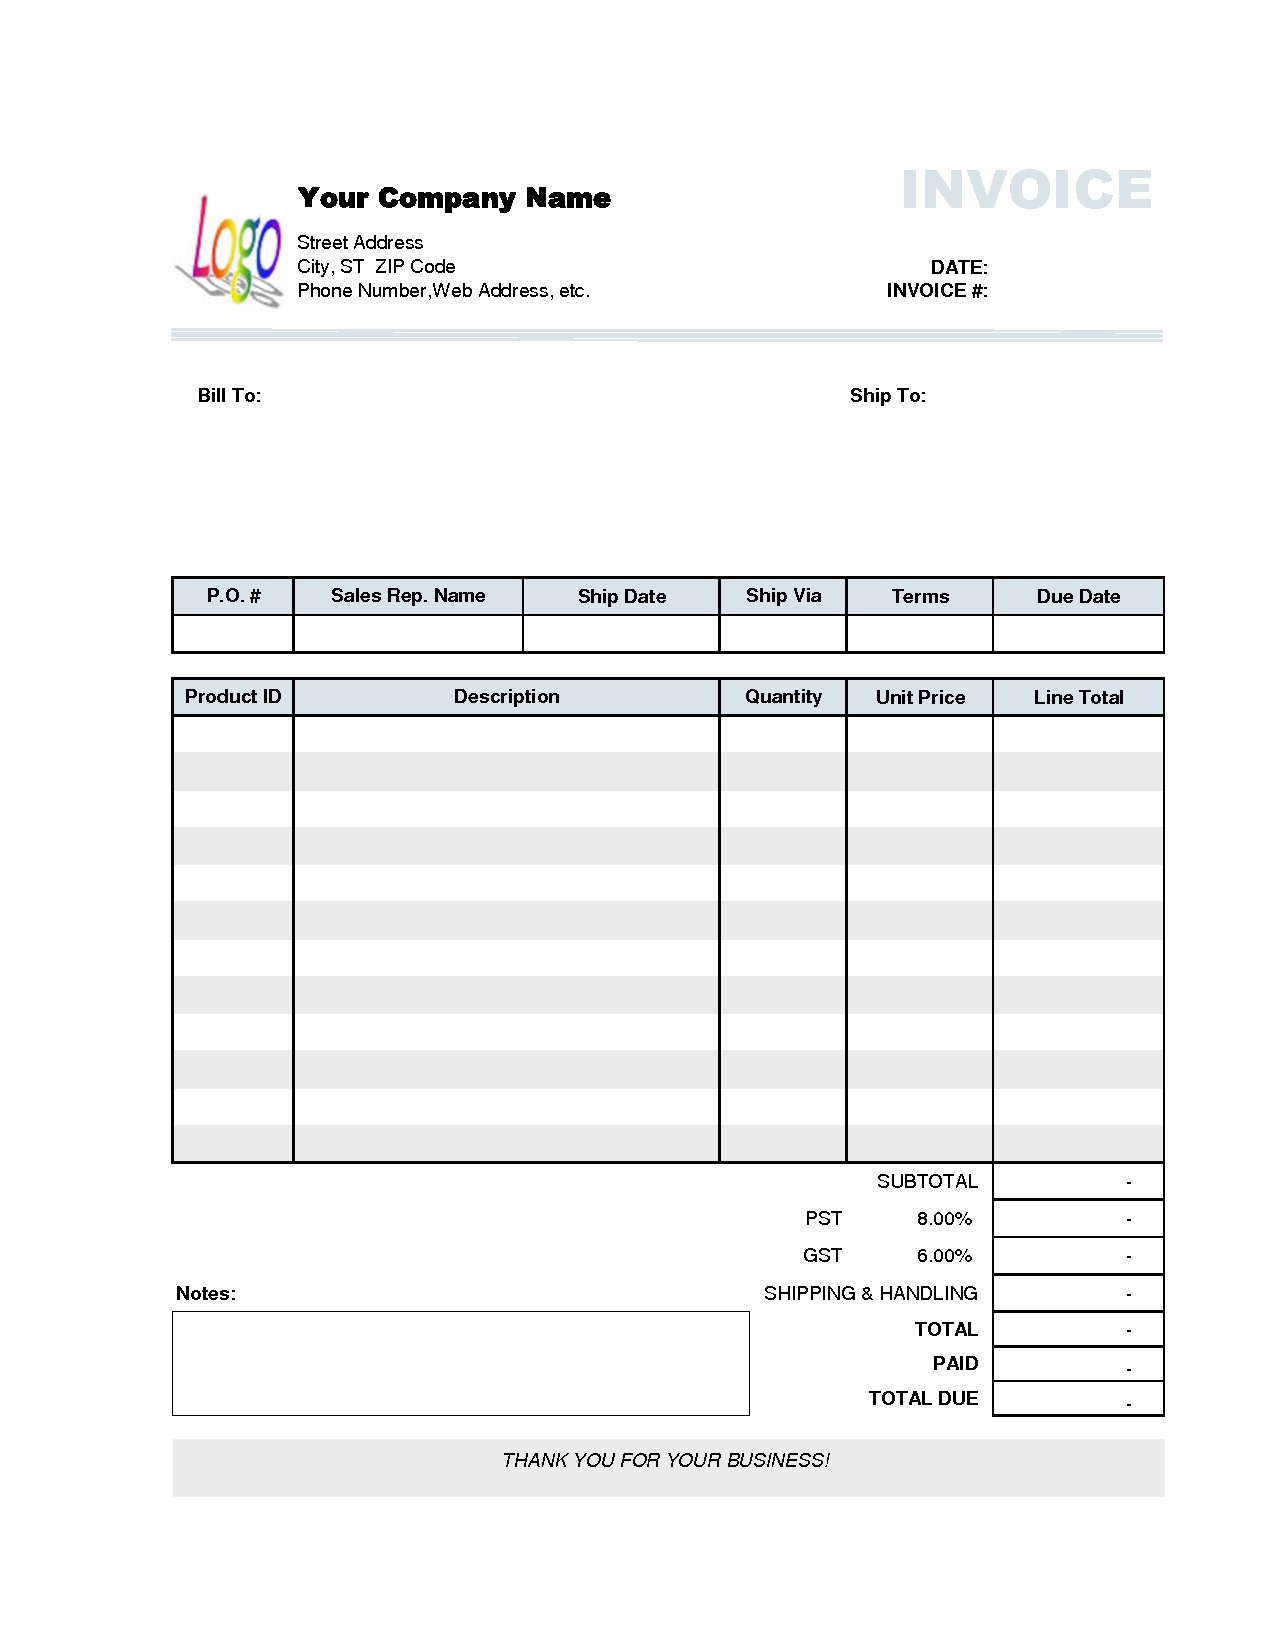 9 printable invoice templates samples and problems of invoicing company invoice sample